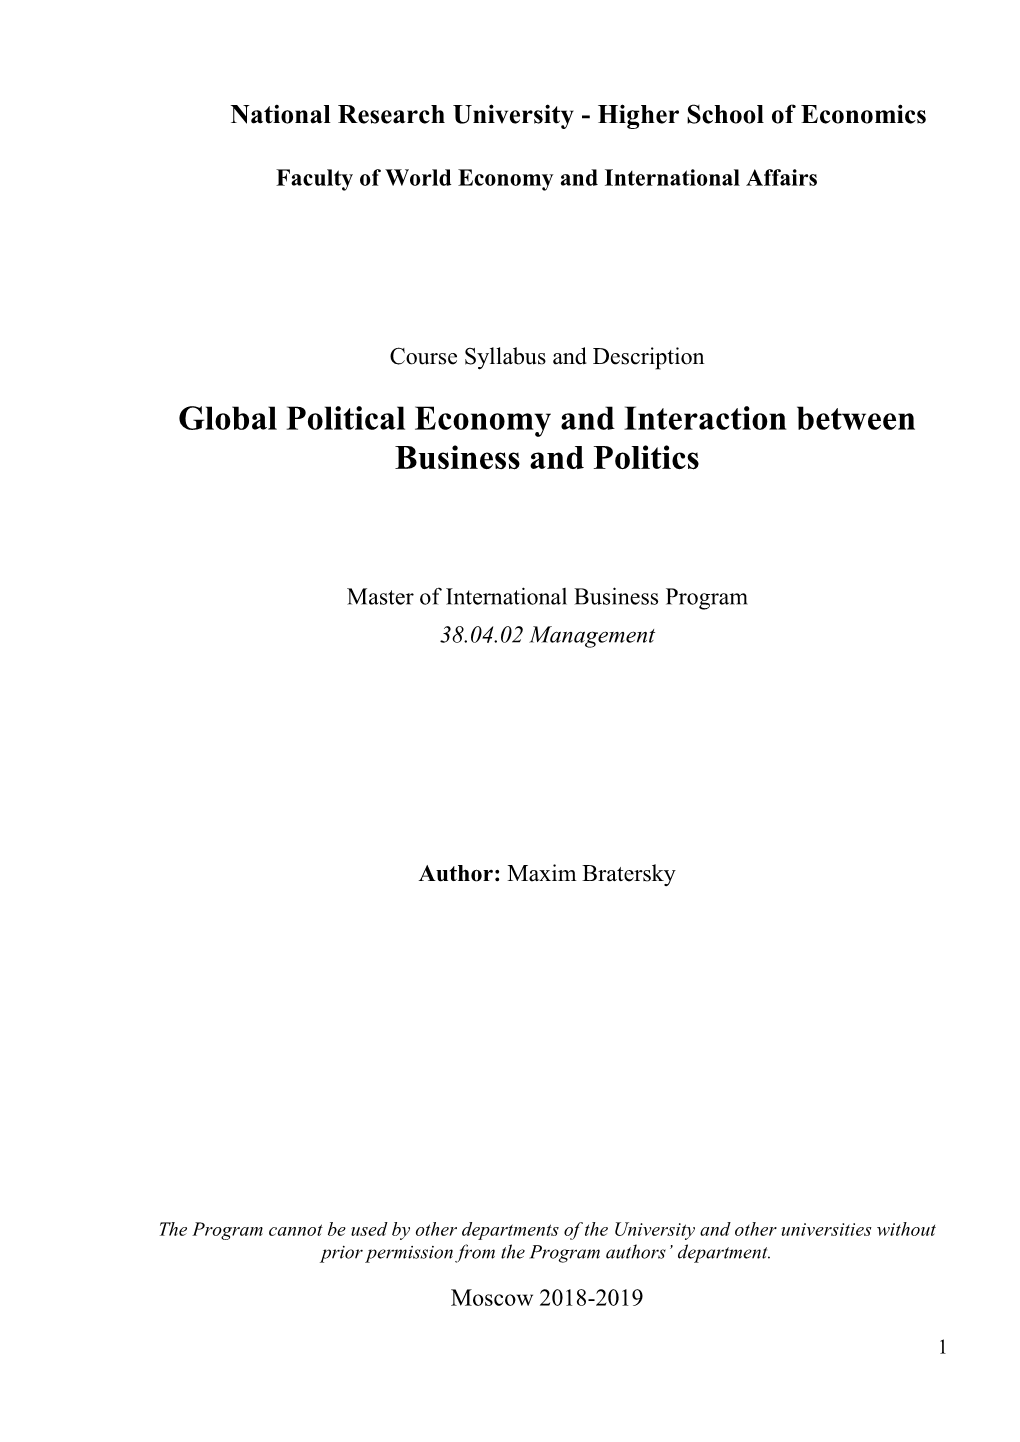 Global Political Economy and Interaction Between Business and Politics